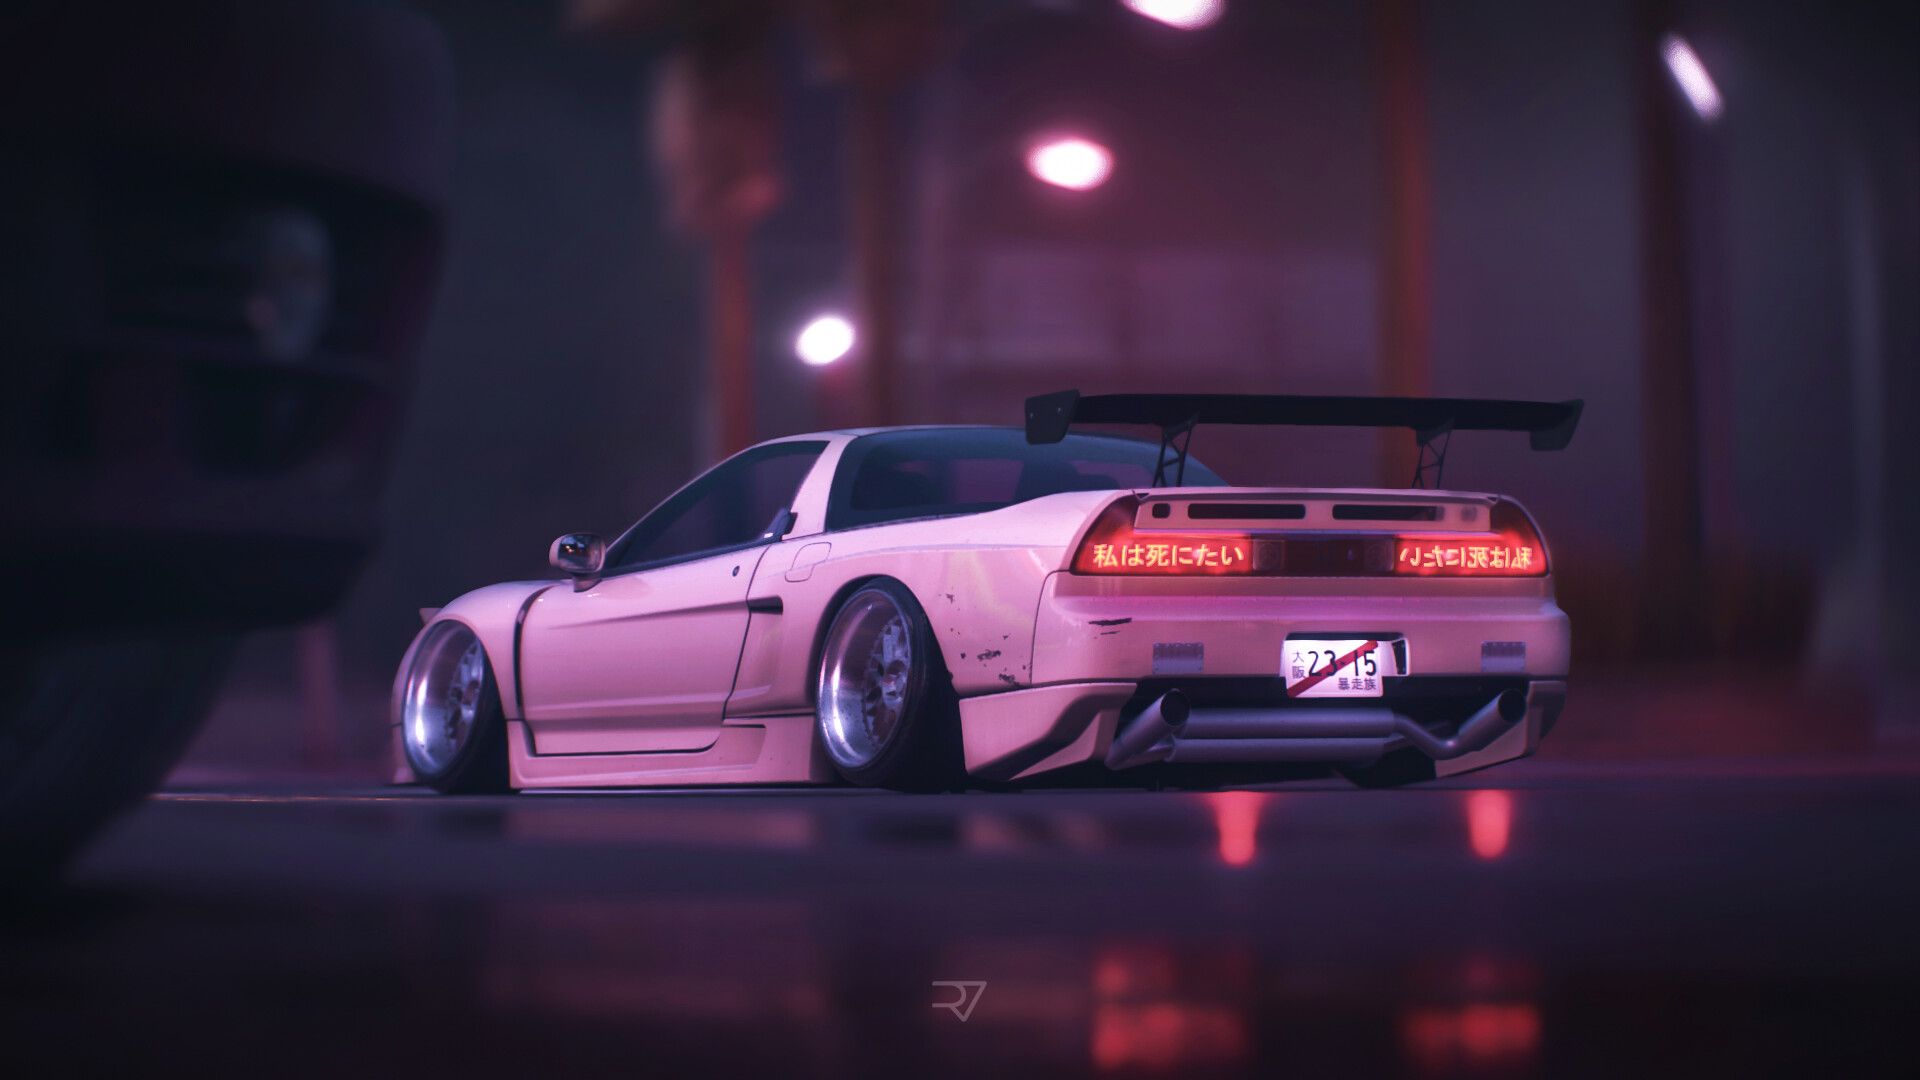 Ｄ Ｒ Ｅ Ａ Ｍ Ｓ ゆケ桜ぇデム by r7val SevenHonda NSX Game: Need for Speed 2015. Acura cars, Street racing cars, Nissan cars